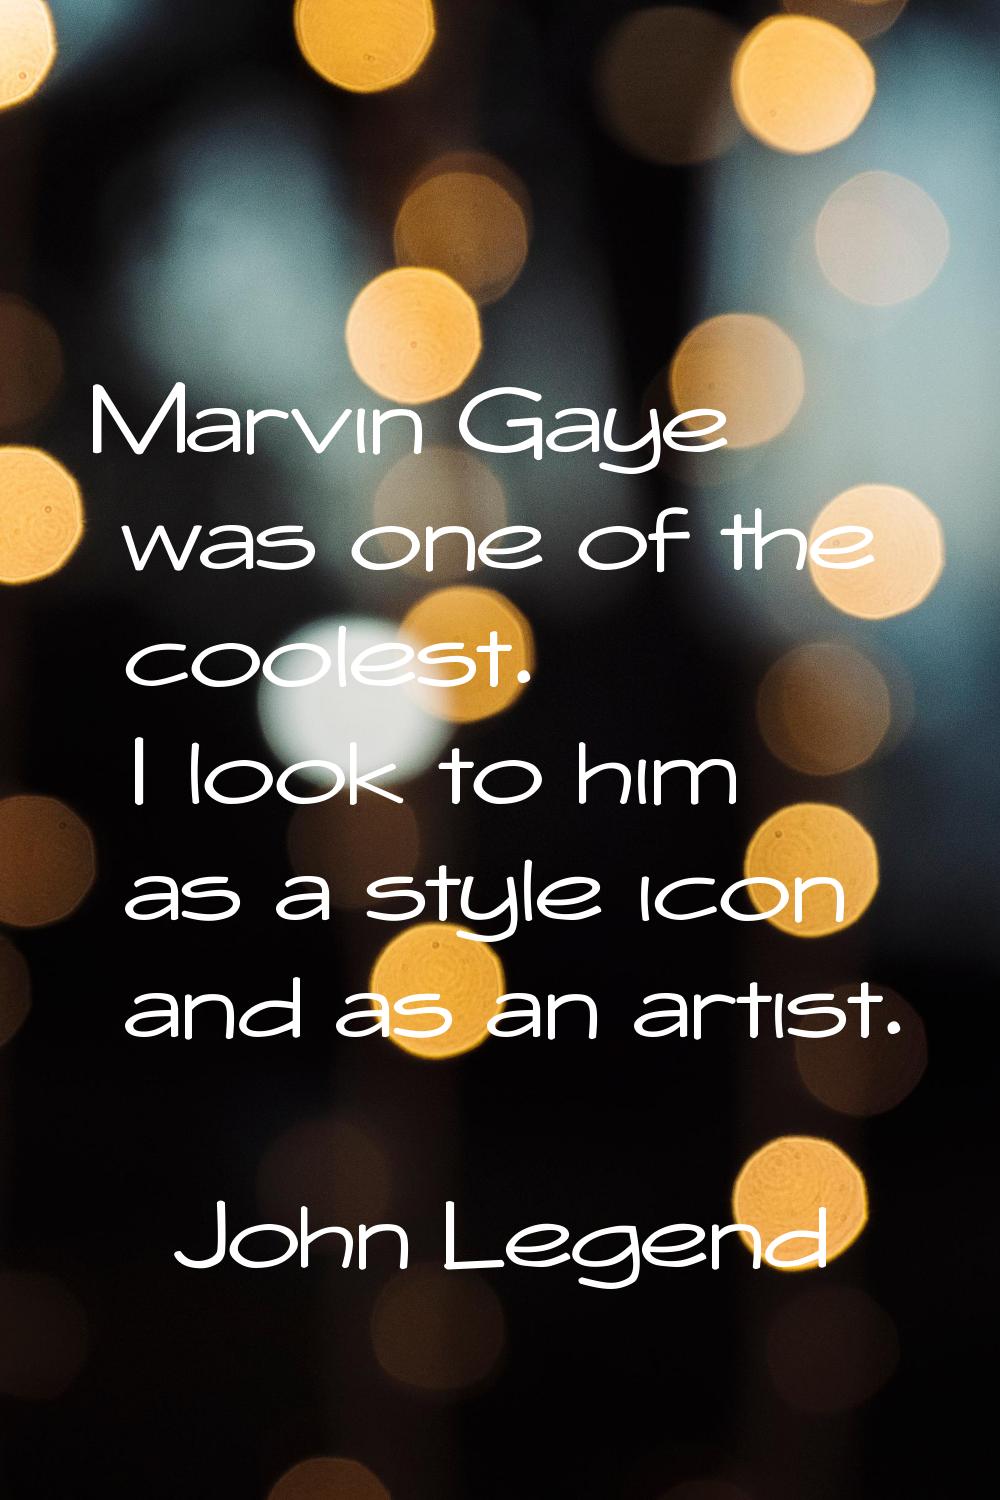 Marvin Gaye was one of the coolest. I look to him as a style icon and as an artist.